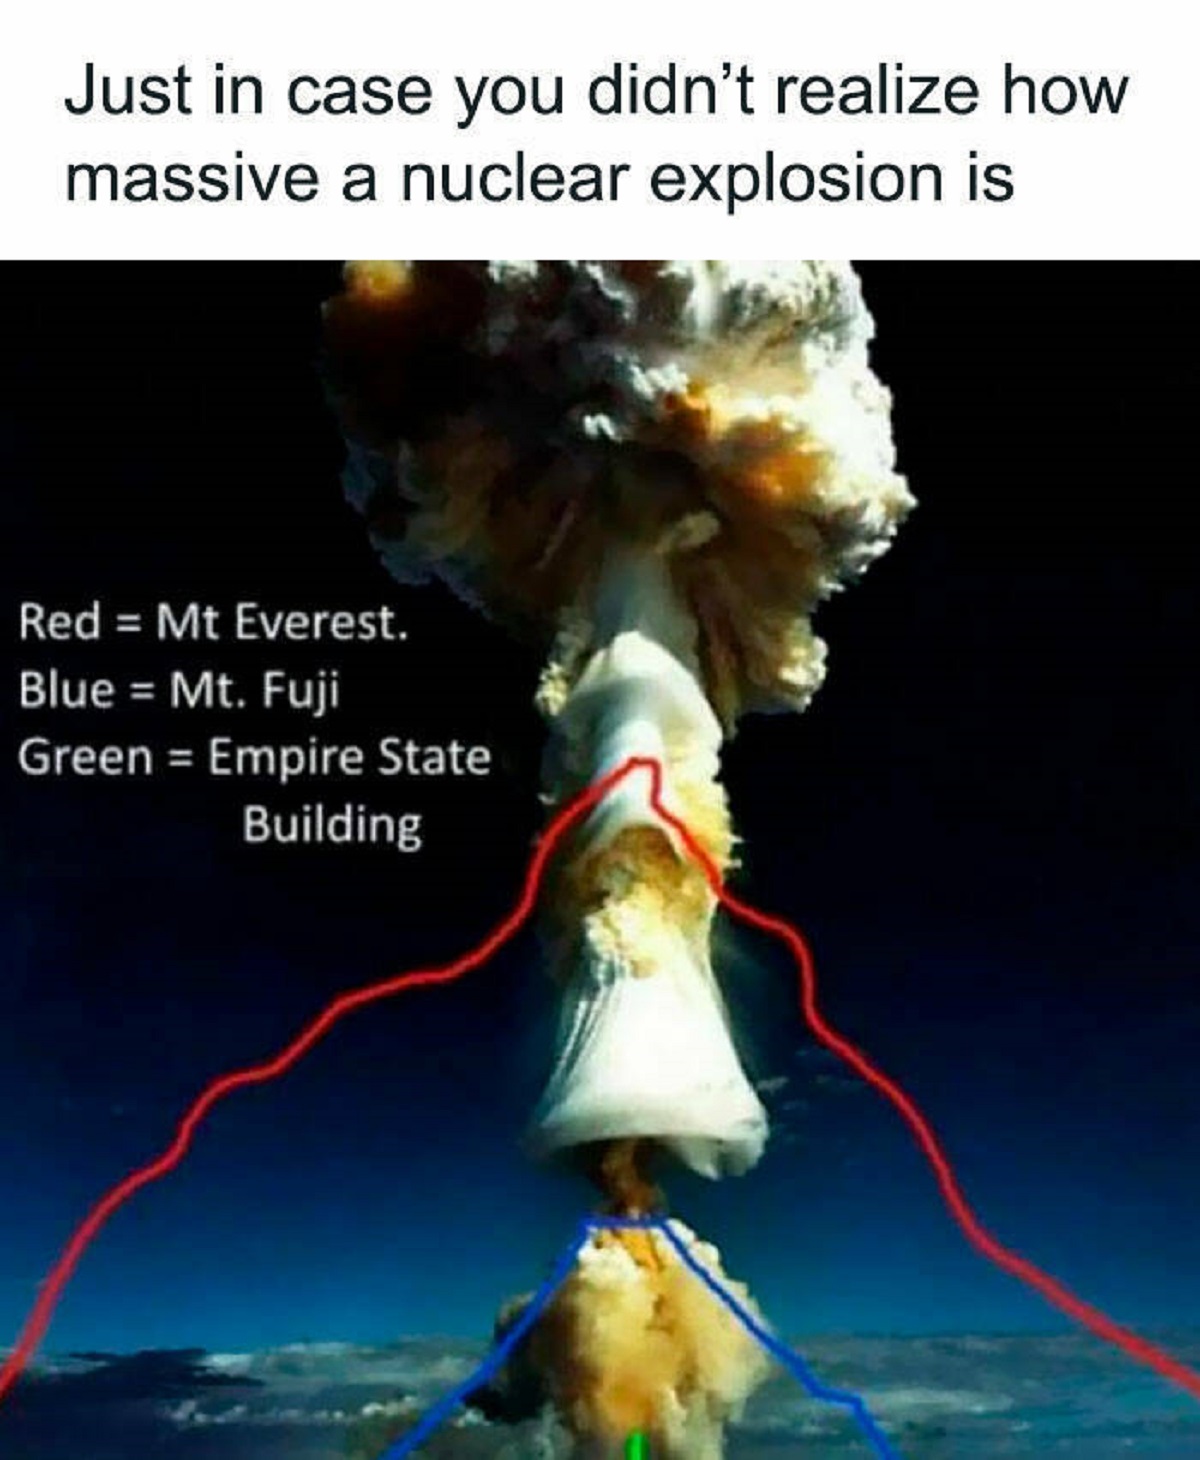 licorne explosion - Just in case you didn't realize how massive a nuclear explosion is Red Mt Everest. Blue Mt. Fuji Green Empire State Building